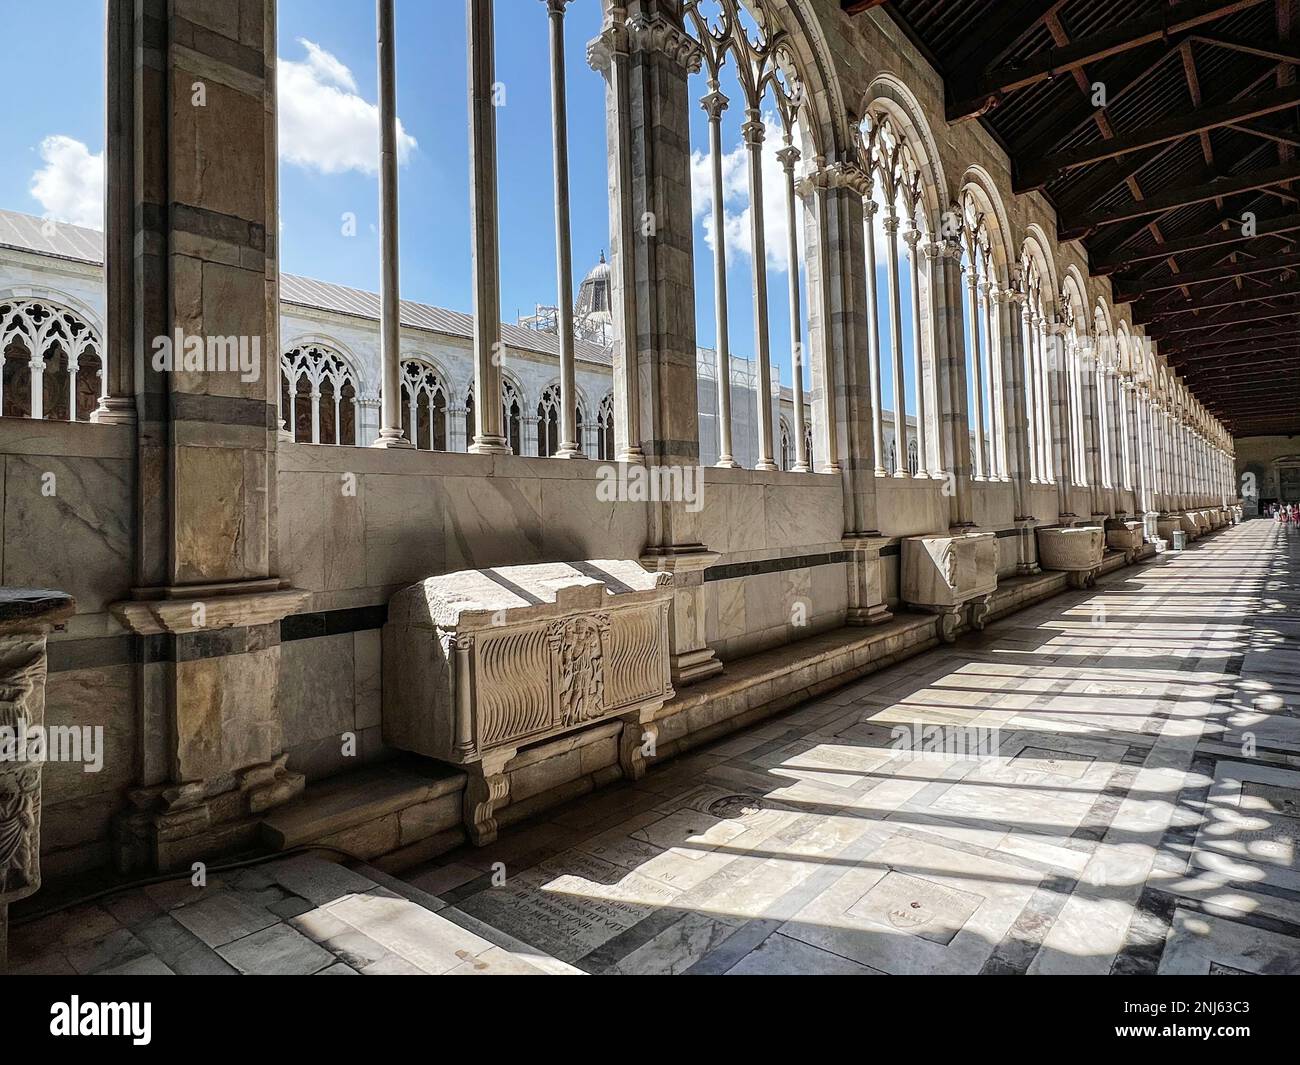 A view from inside the Campo Santo in the Piazza del Duomo, Pisa Italy Stock Photo